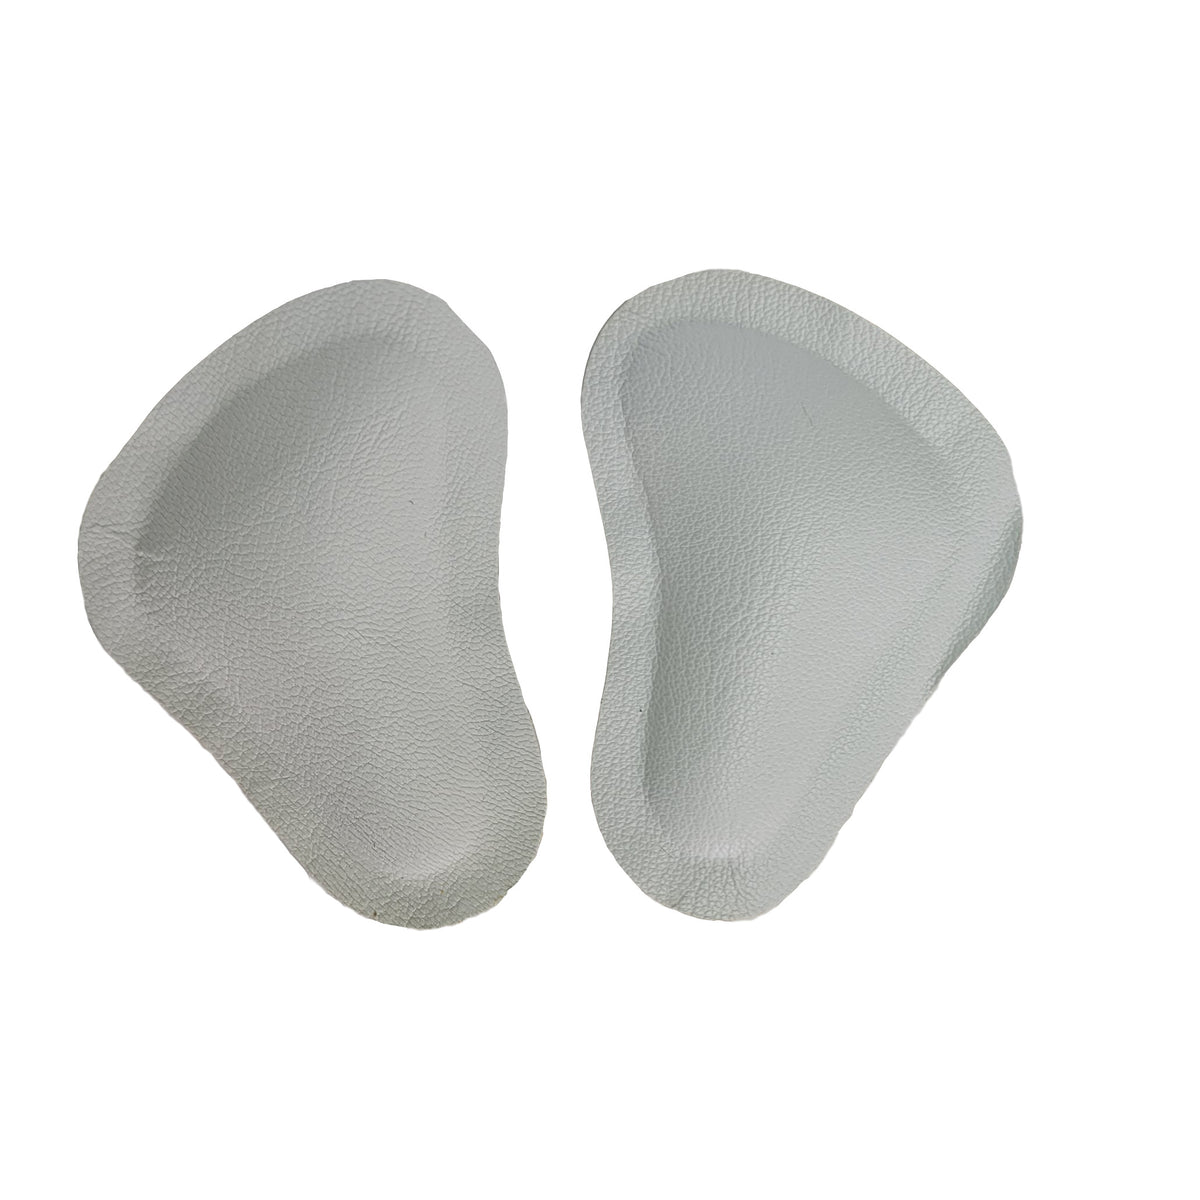 T-Form - T-Shape Metatarsal Pad – Meltonian Shoe and Leather Care